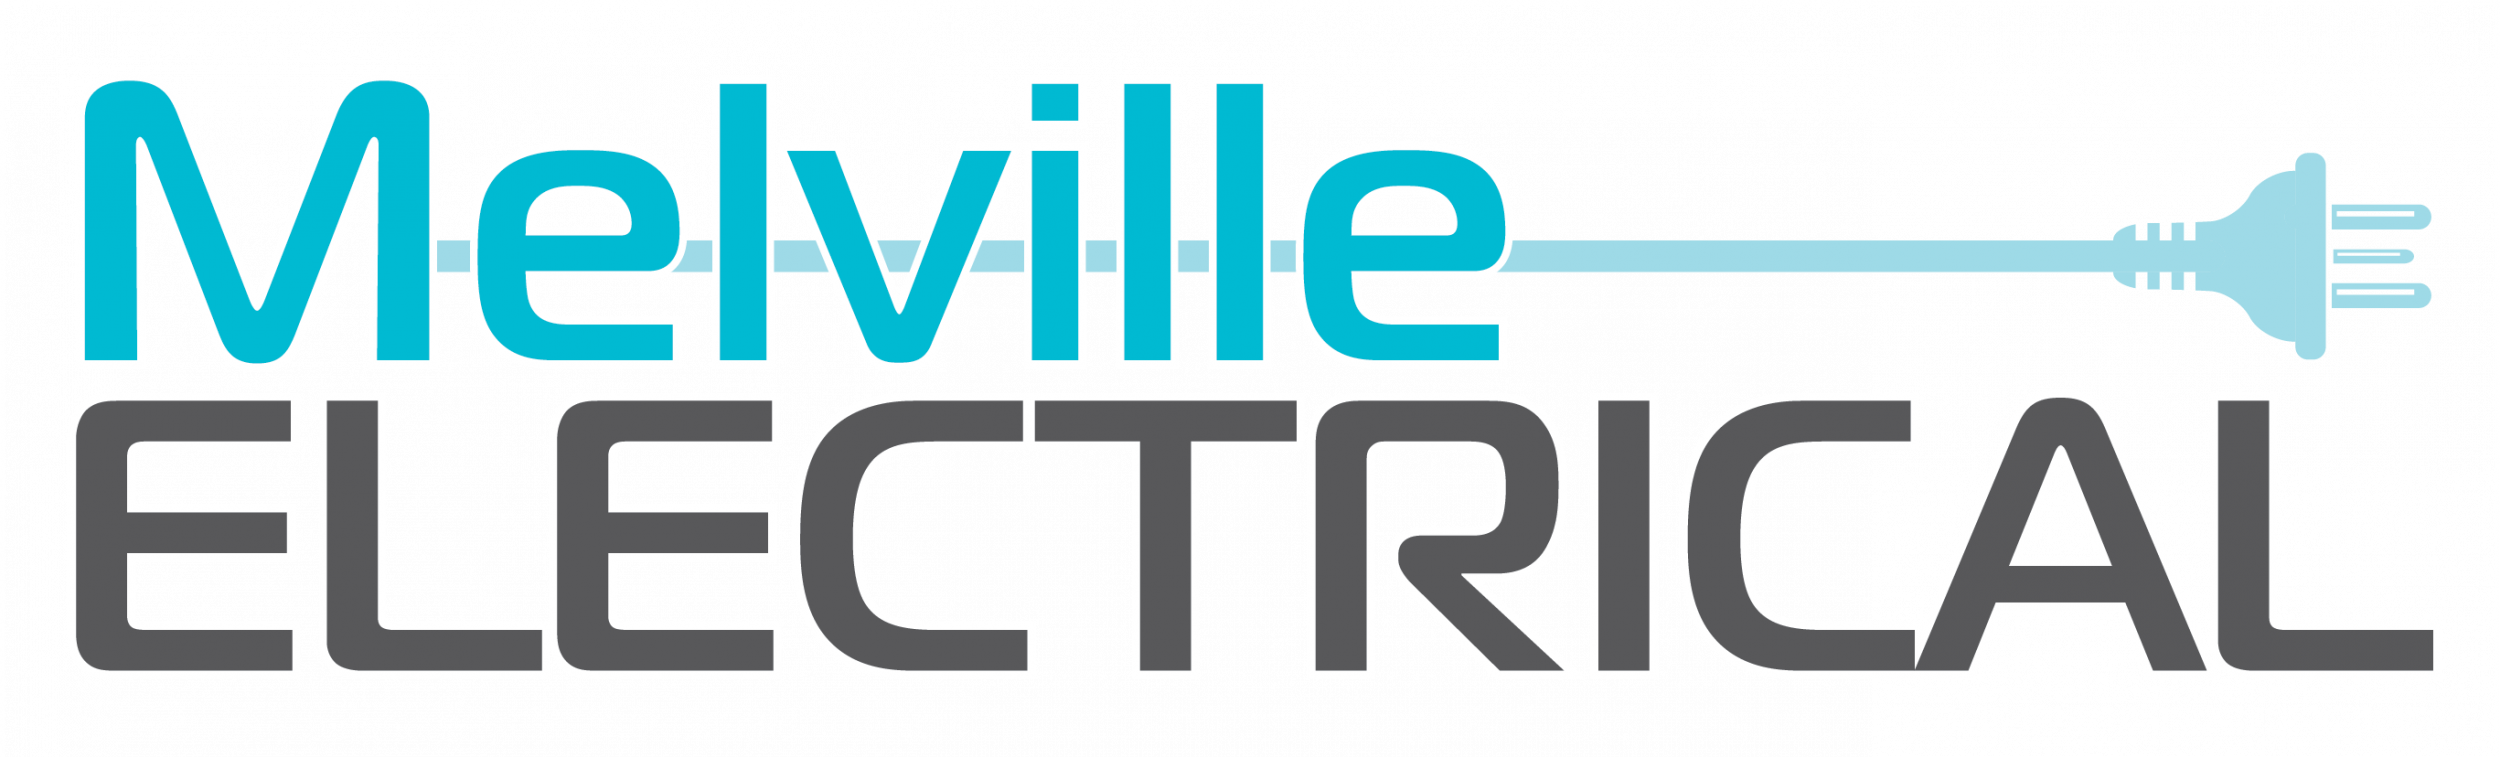 Melville Electrical